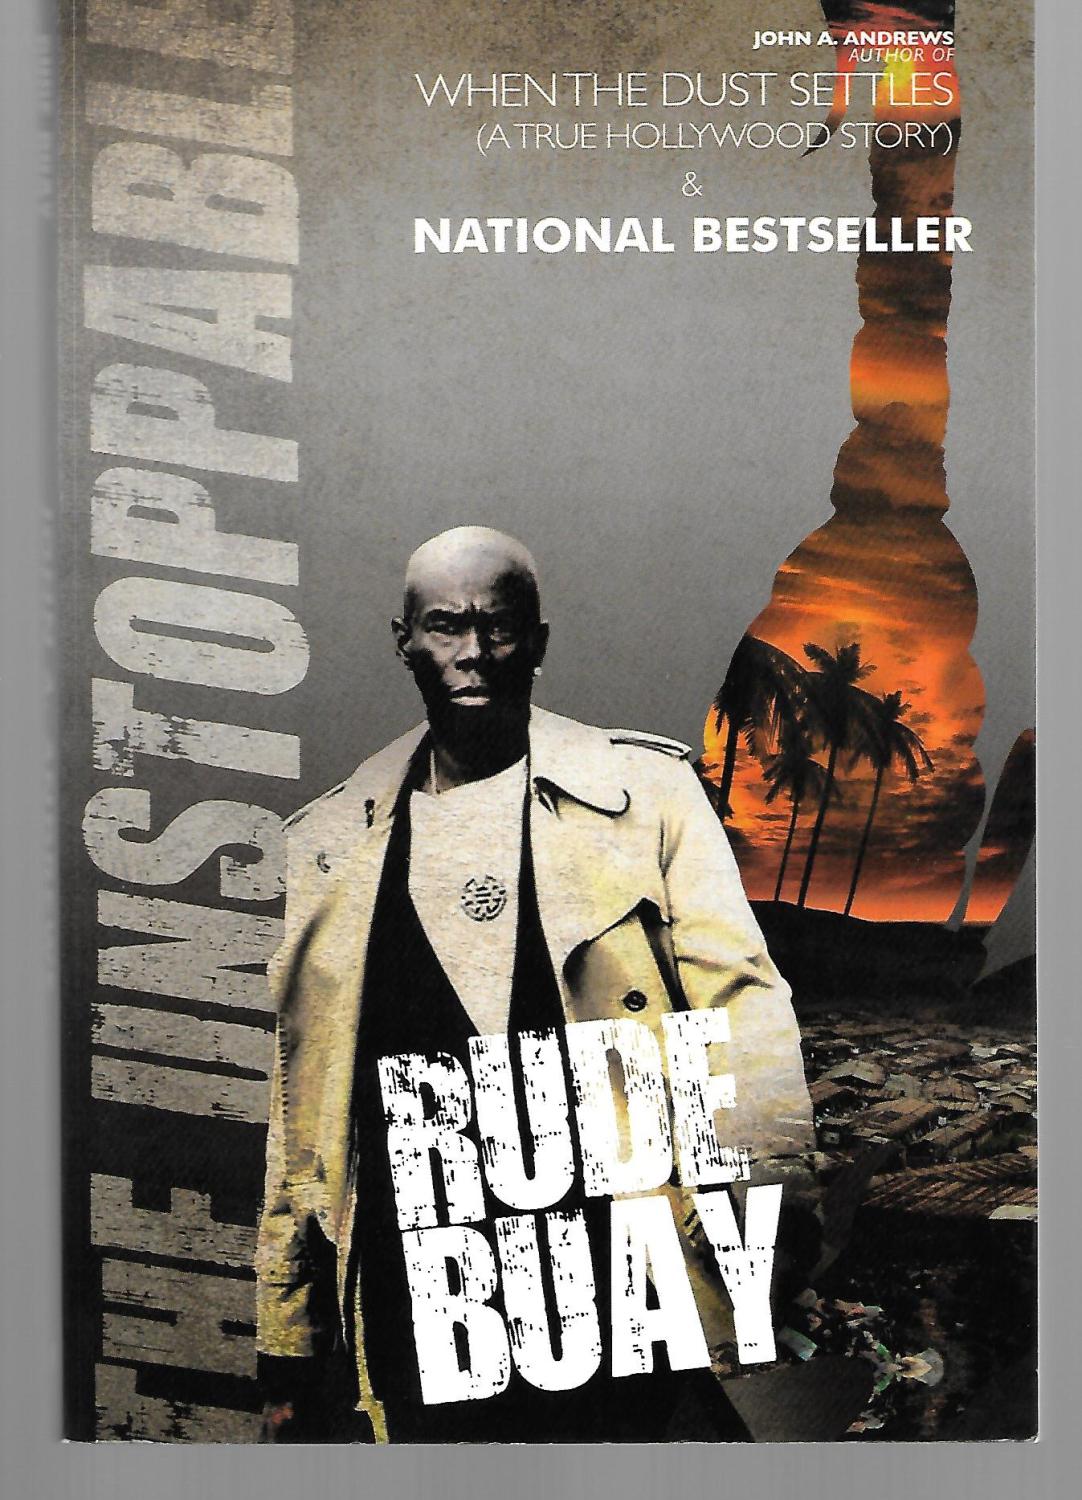 Rude Buay . The Unstoppable ( Aka Rude Boy . The Unstoppable ) - John Andrews ( Signed Copy )